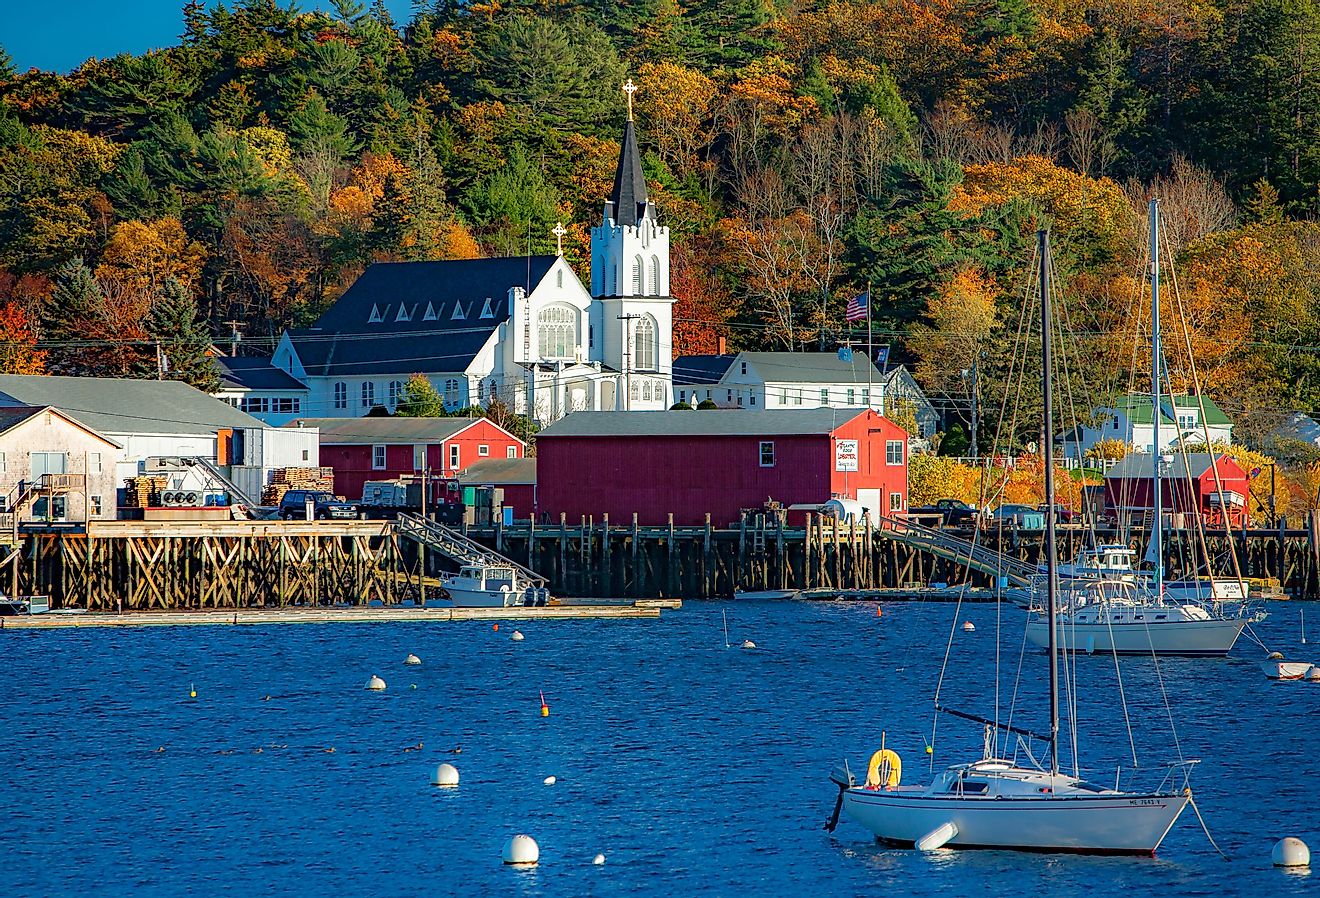 Our Lady Queen of Peace catholic church on the shore of Boothbay Harbor, Maine. Image credit Bob Pool via Shutterstock